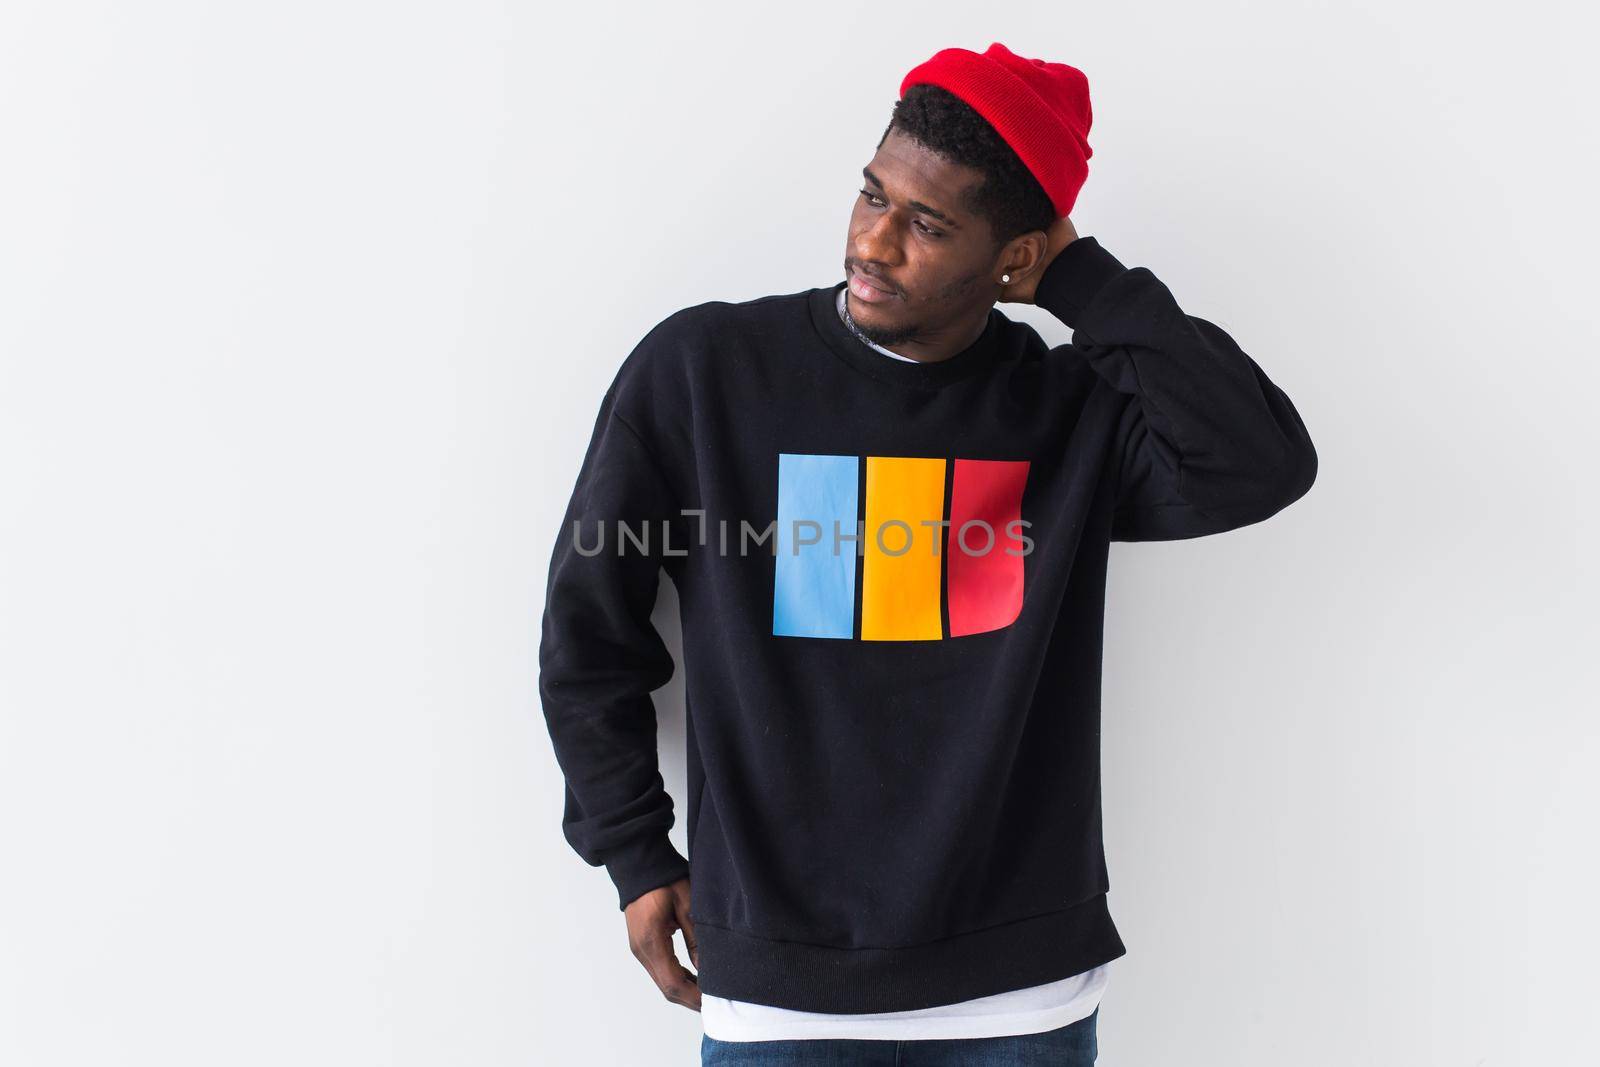 Studio shot of young handsome African man wearing hoodie against white background.